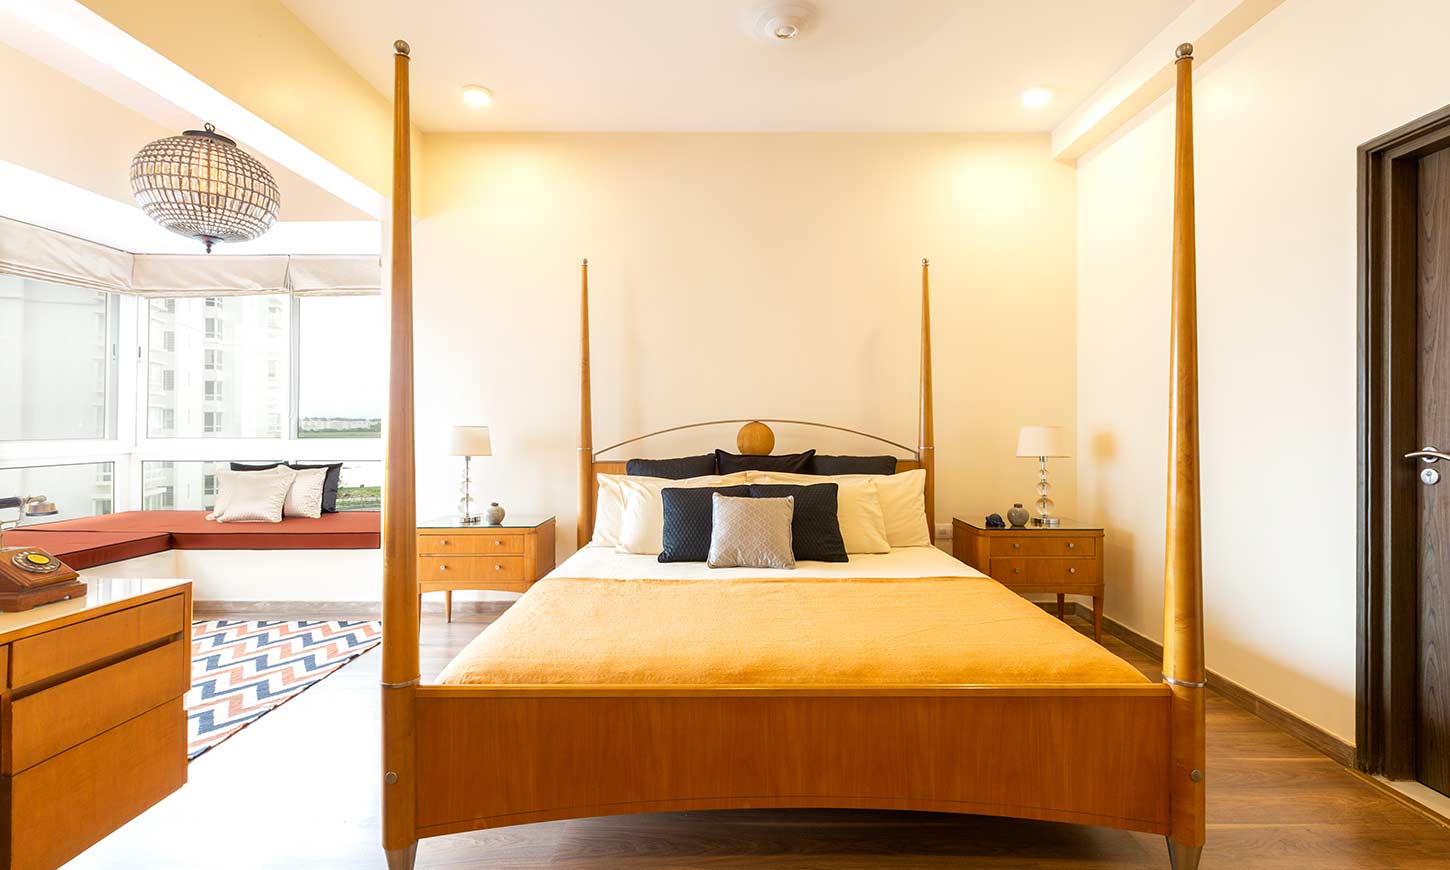 A master bedroom with rustic design for apartment interiors in bangalore